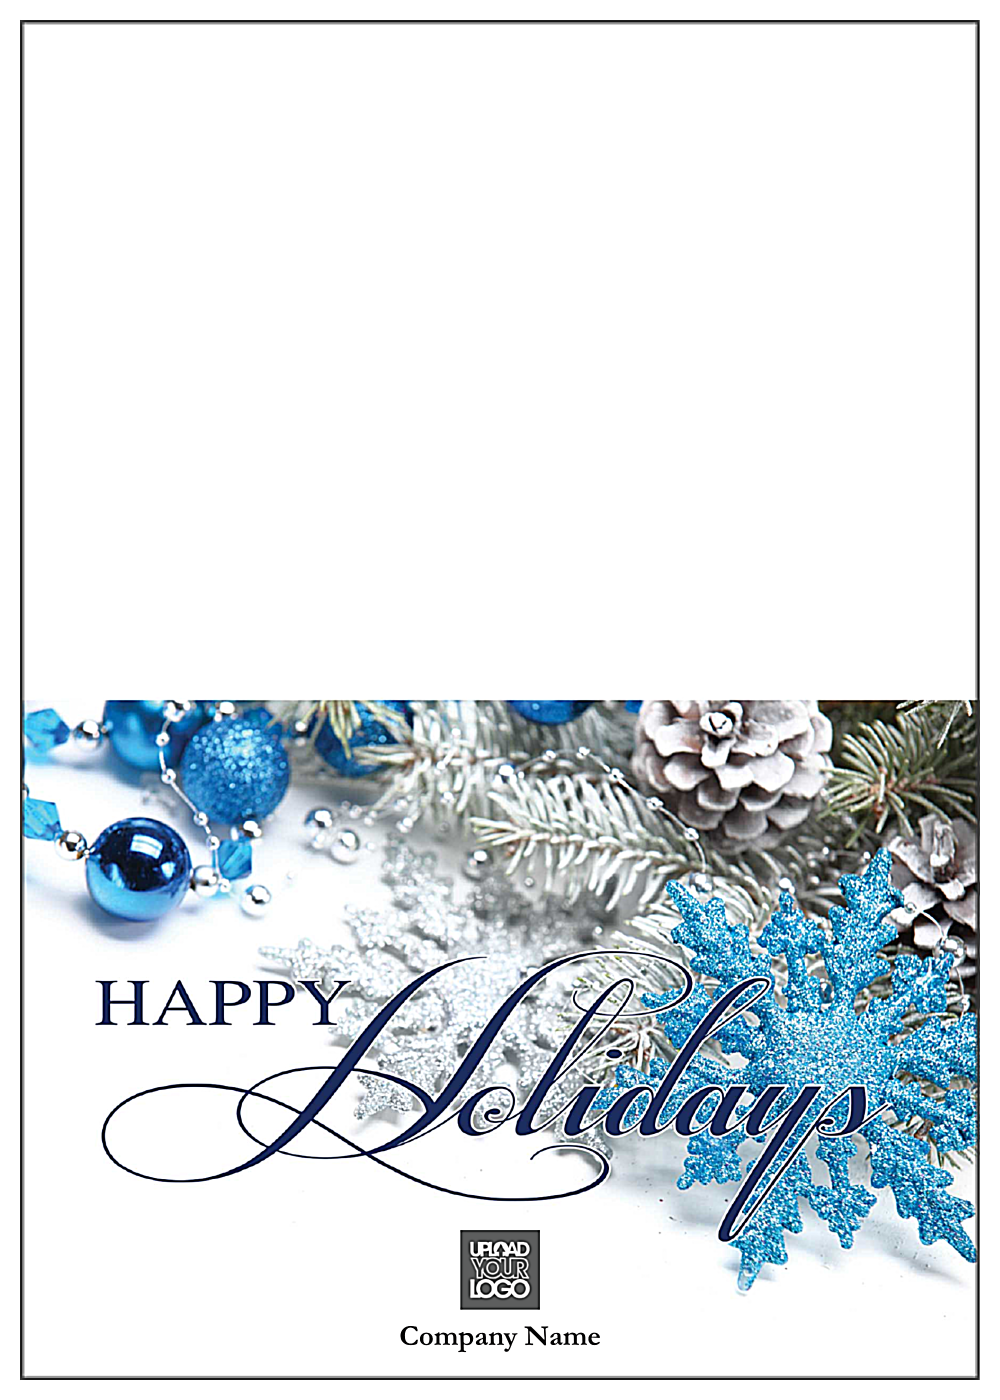 Blue Happy Holidays front - Greeting Cards Maker